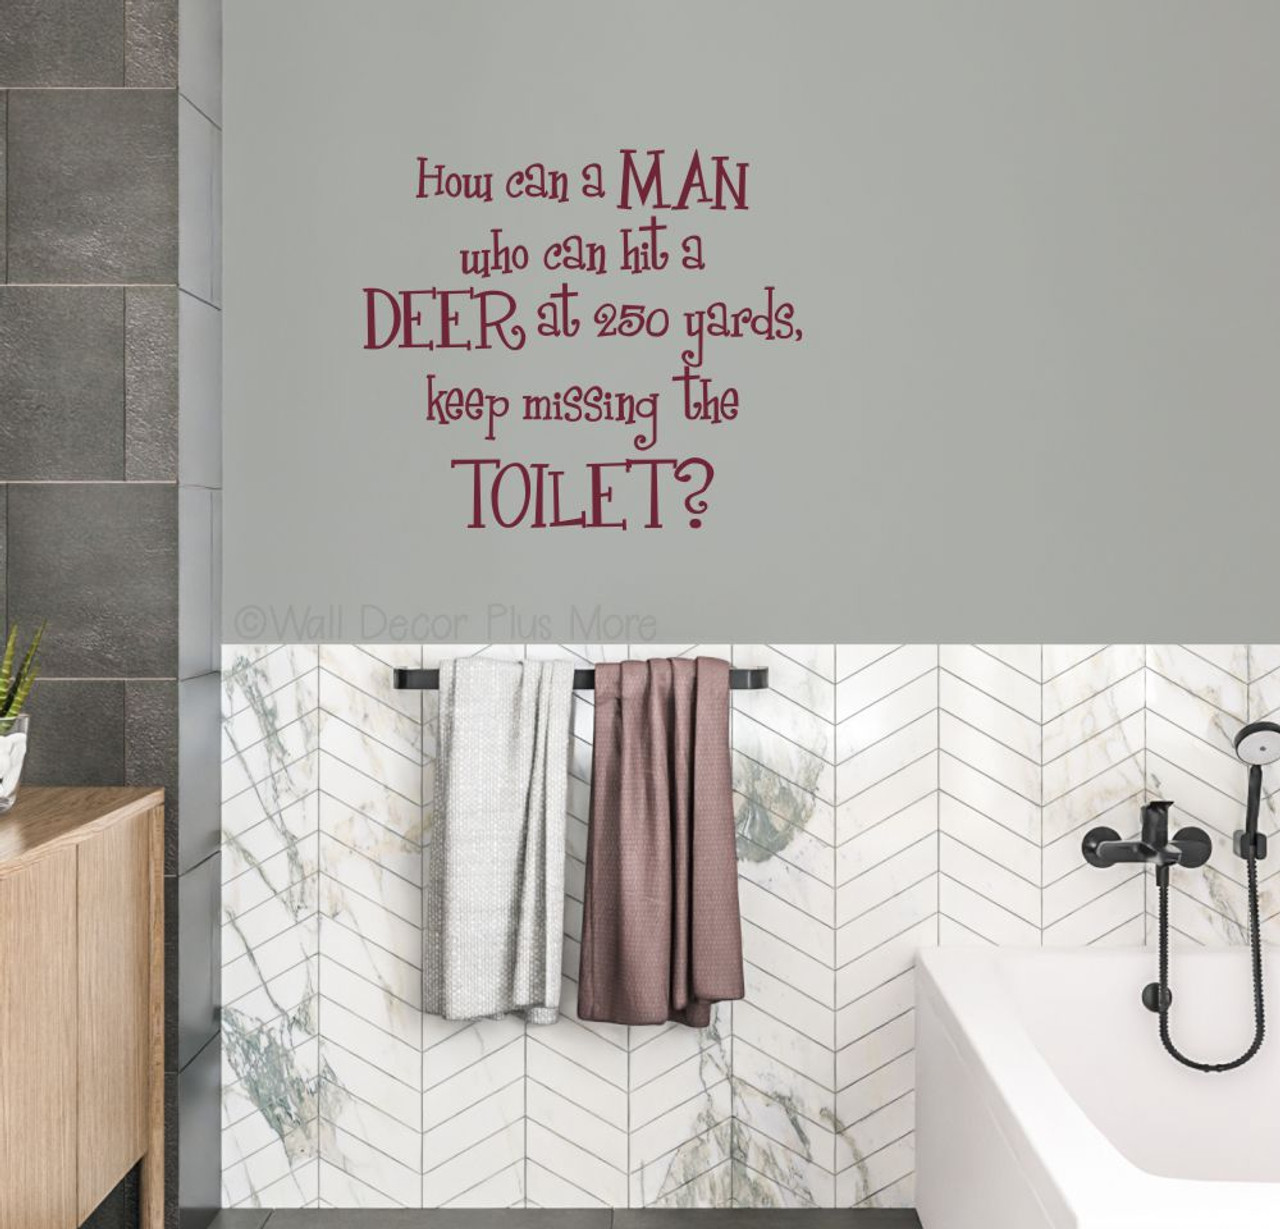 https://cdn11.bigcommerce.com/s-571px4/images/stencil/1280x1280/products/611/21628/WD277_Man_Hit_a_Deer_Keep_Missing_the_Toilet_Burgundy_Hunting_and_Fishing_Bathroom_Decor_Deer_Hunting_Wall_Art__82505.1695835846.jpg?c=2